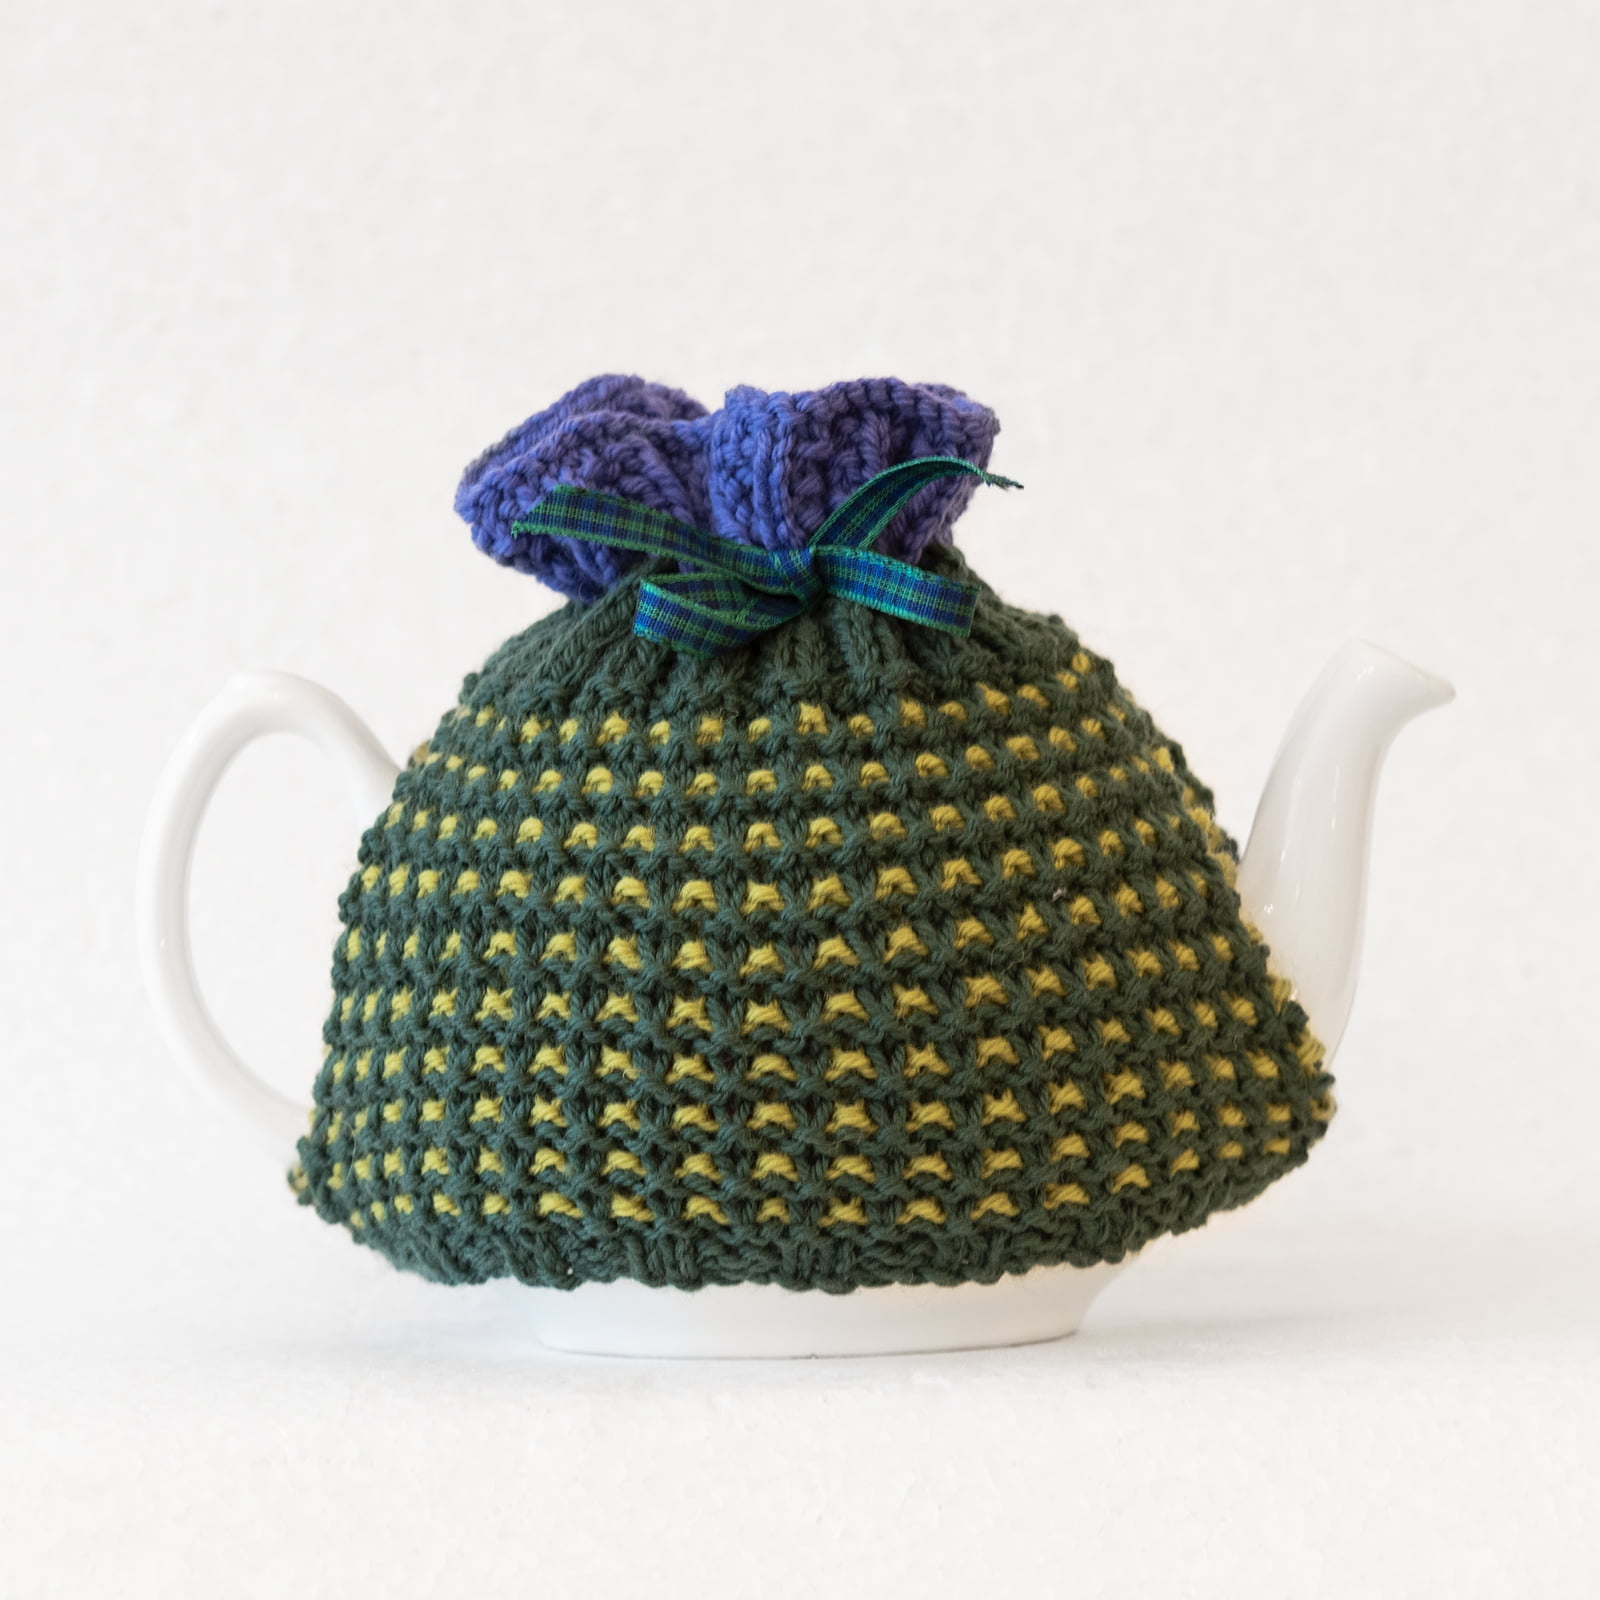 Hand knitted Tea cosy